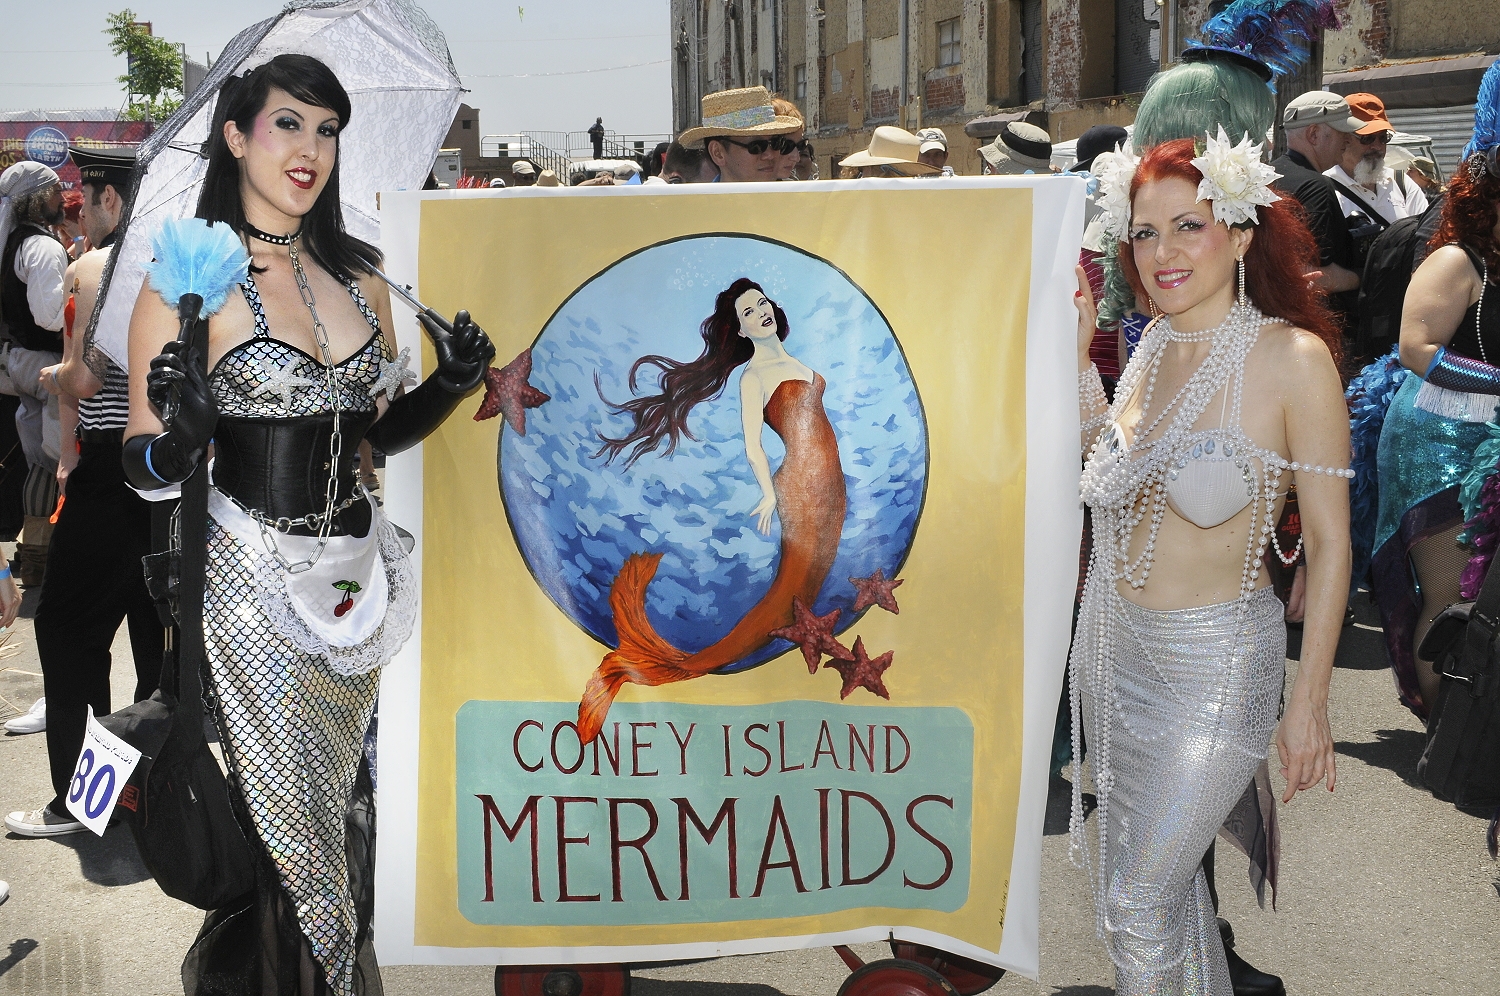 Coney Island Mermaid Parade 2016: What You Need To Know – CBS New York